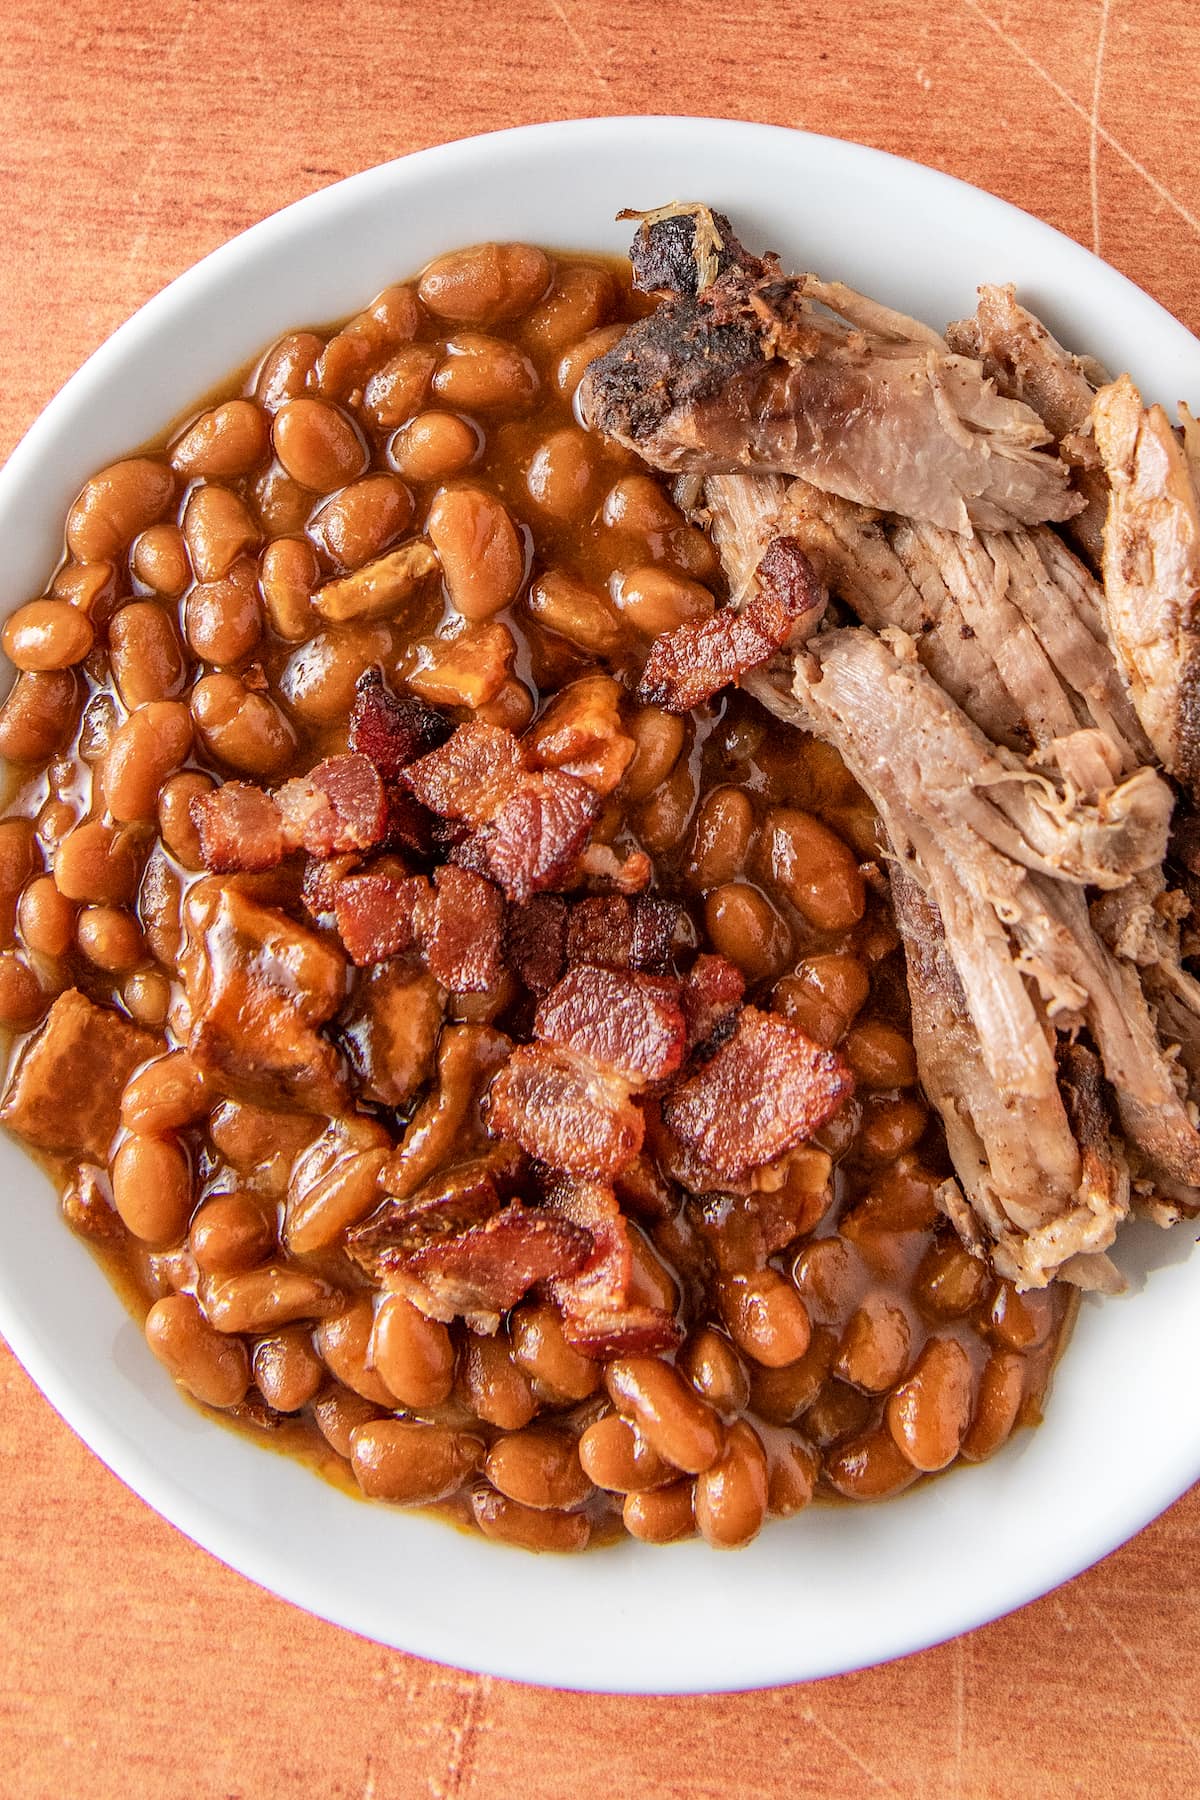 baked beans in a bowl with pulled pork on the side